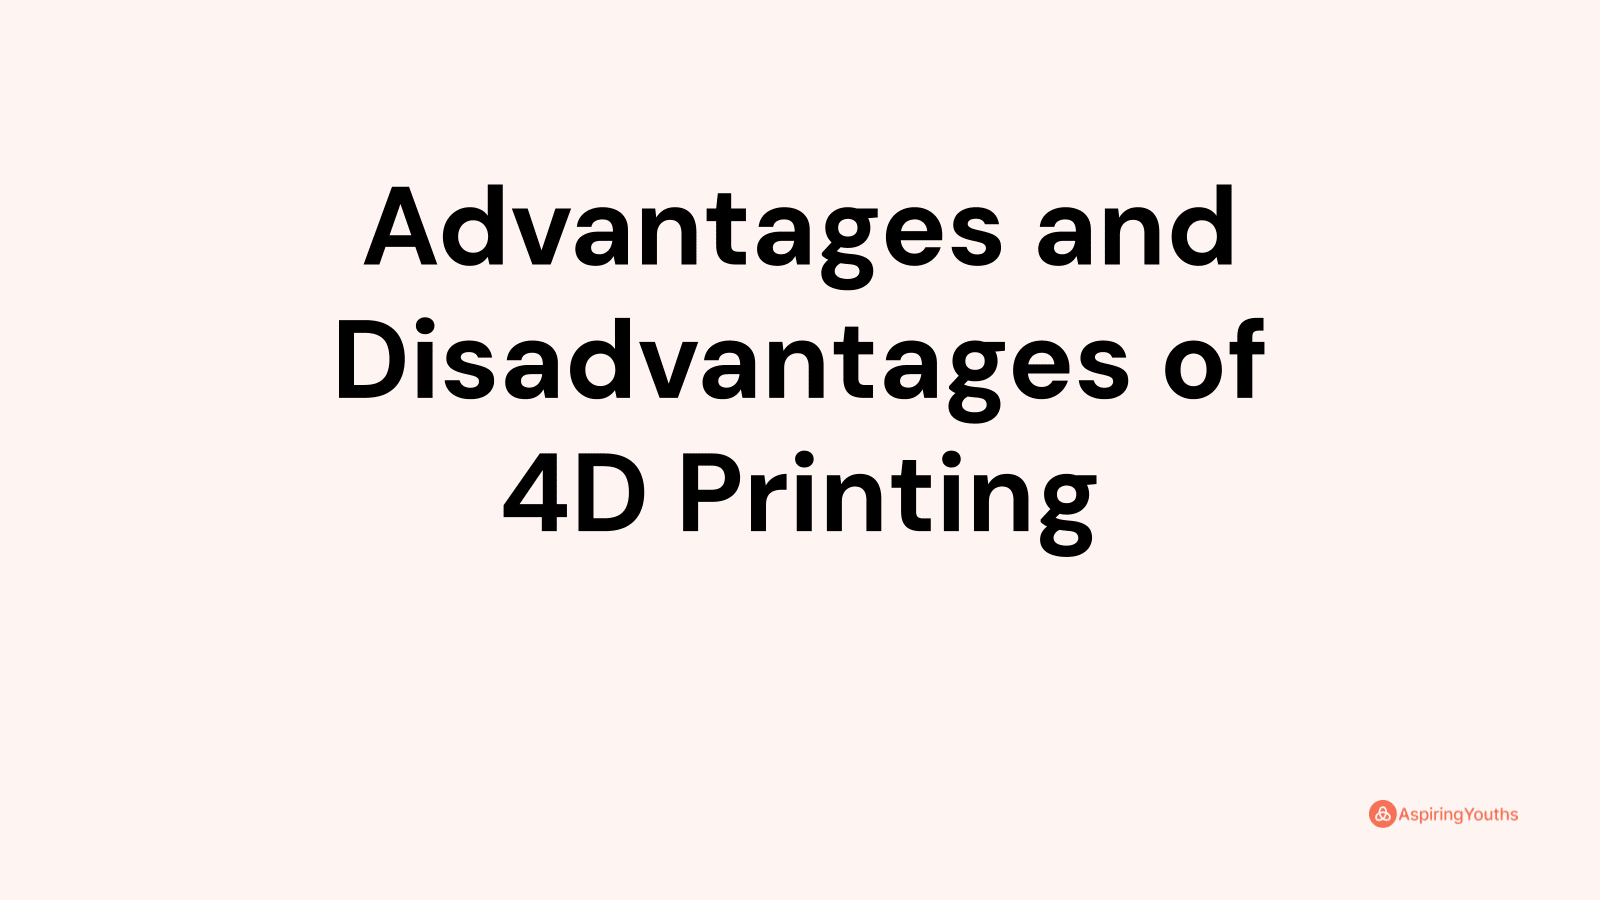 Advantages and disadvantages of 4D Printing